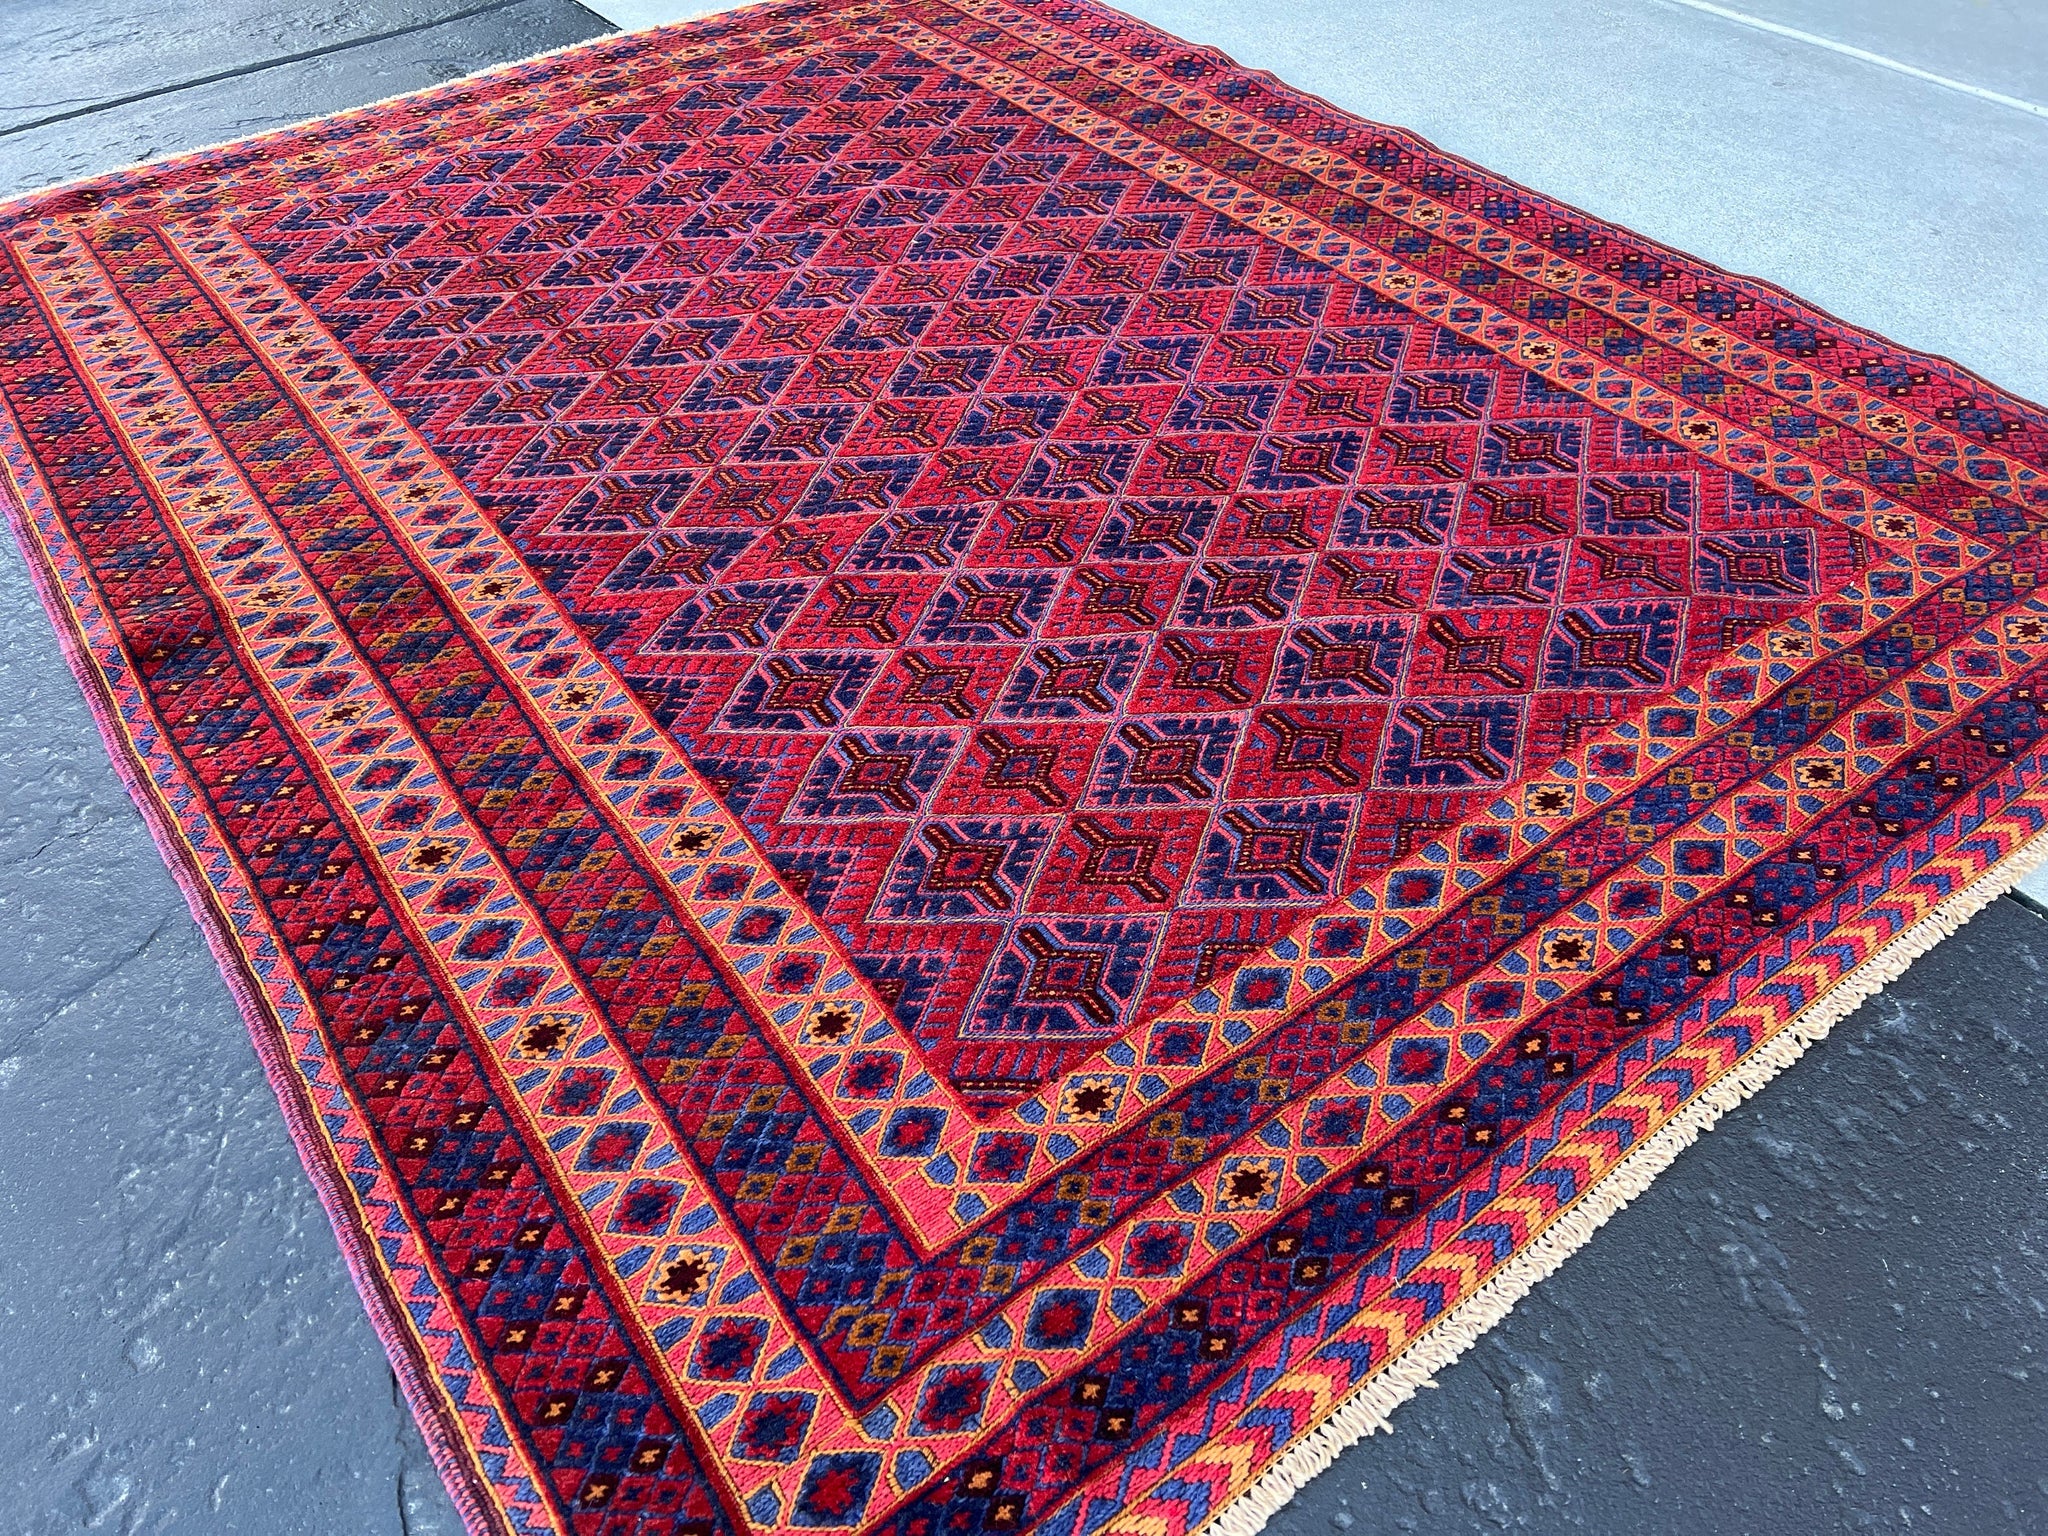 5x7 (150x215) Fair Trade Handmade Afghan Rug | Cherry Red Moss Green Black Taupe Crimson Red Midnight Blue | Hand Knotted Geometric Wool